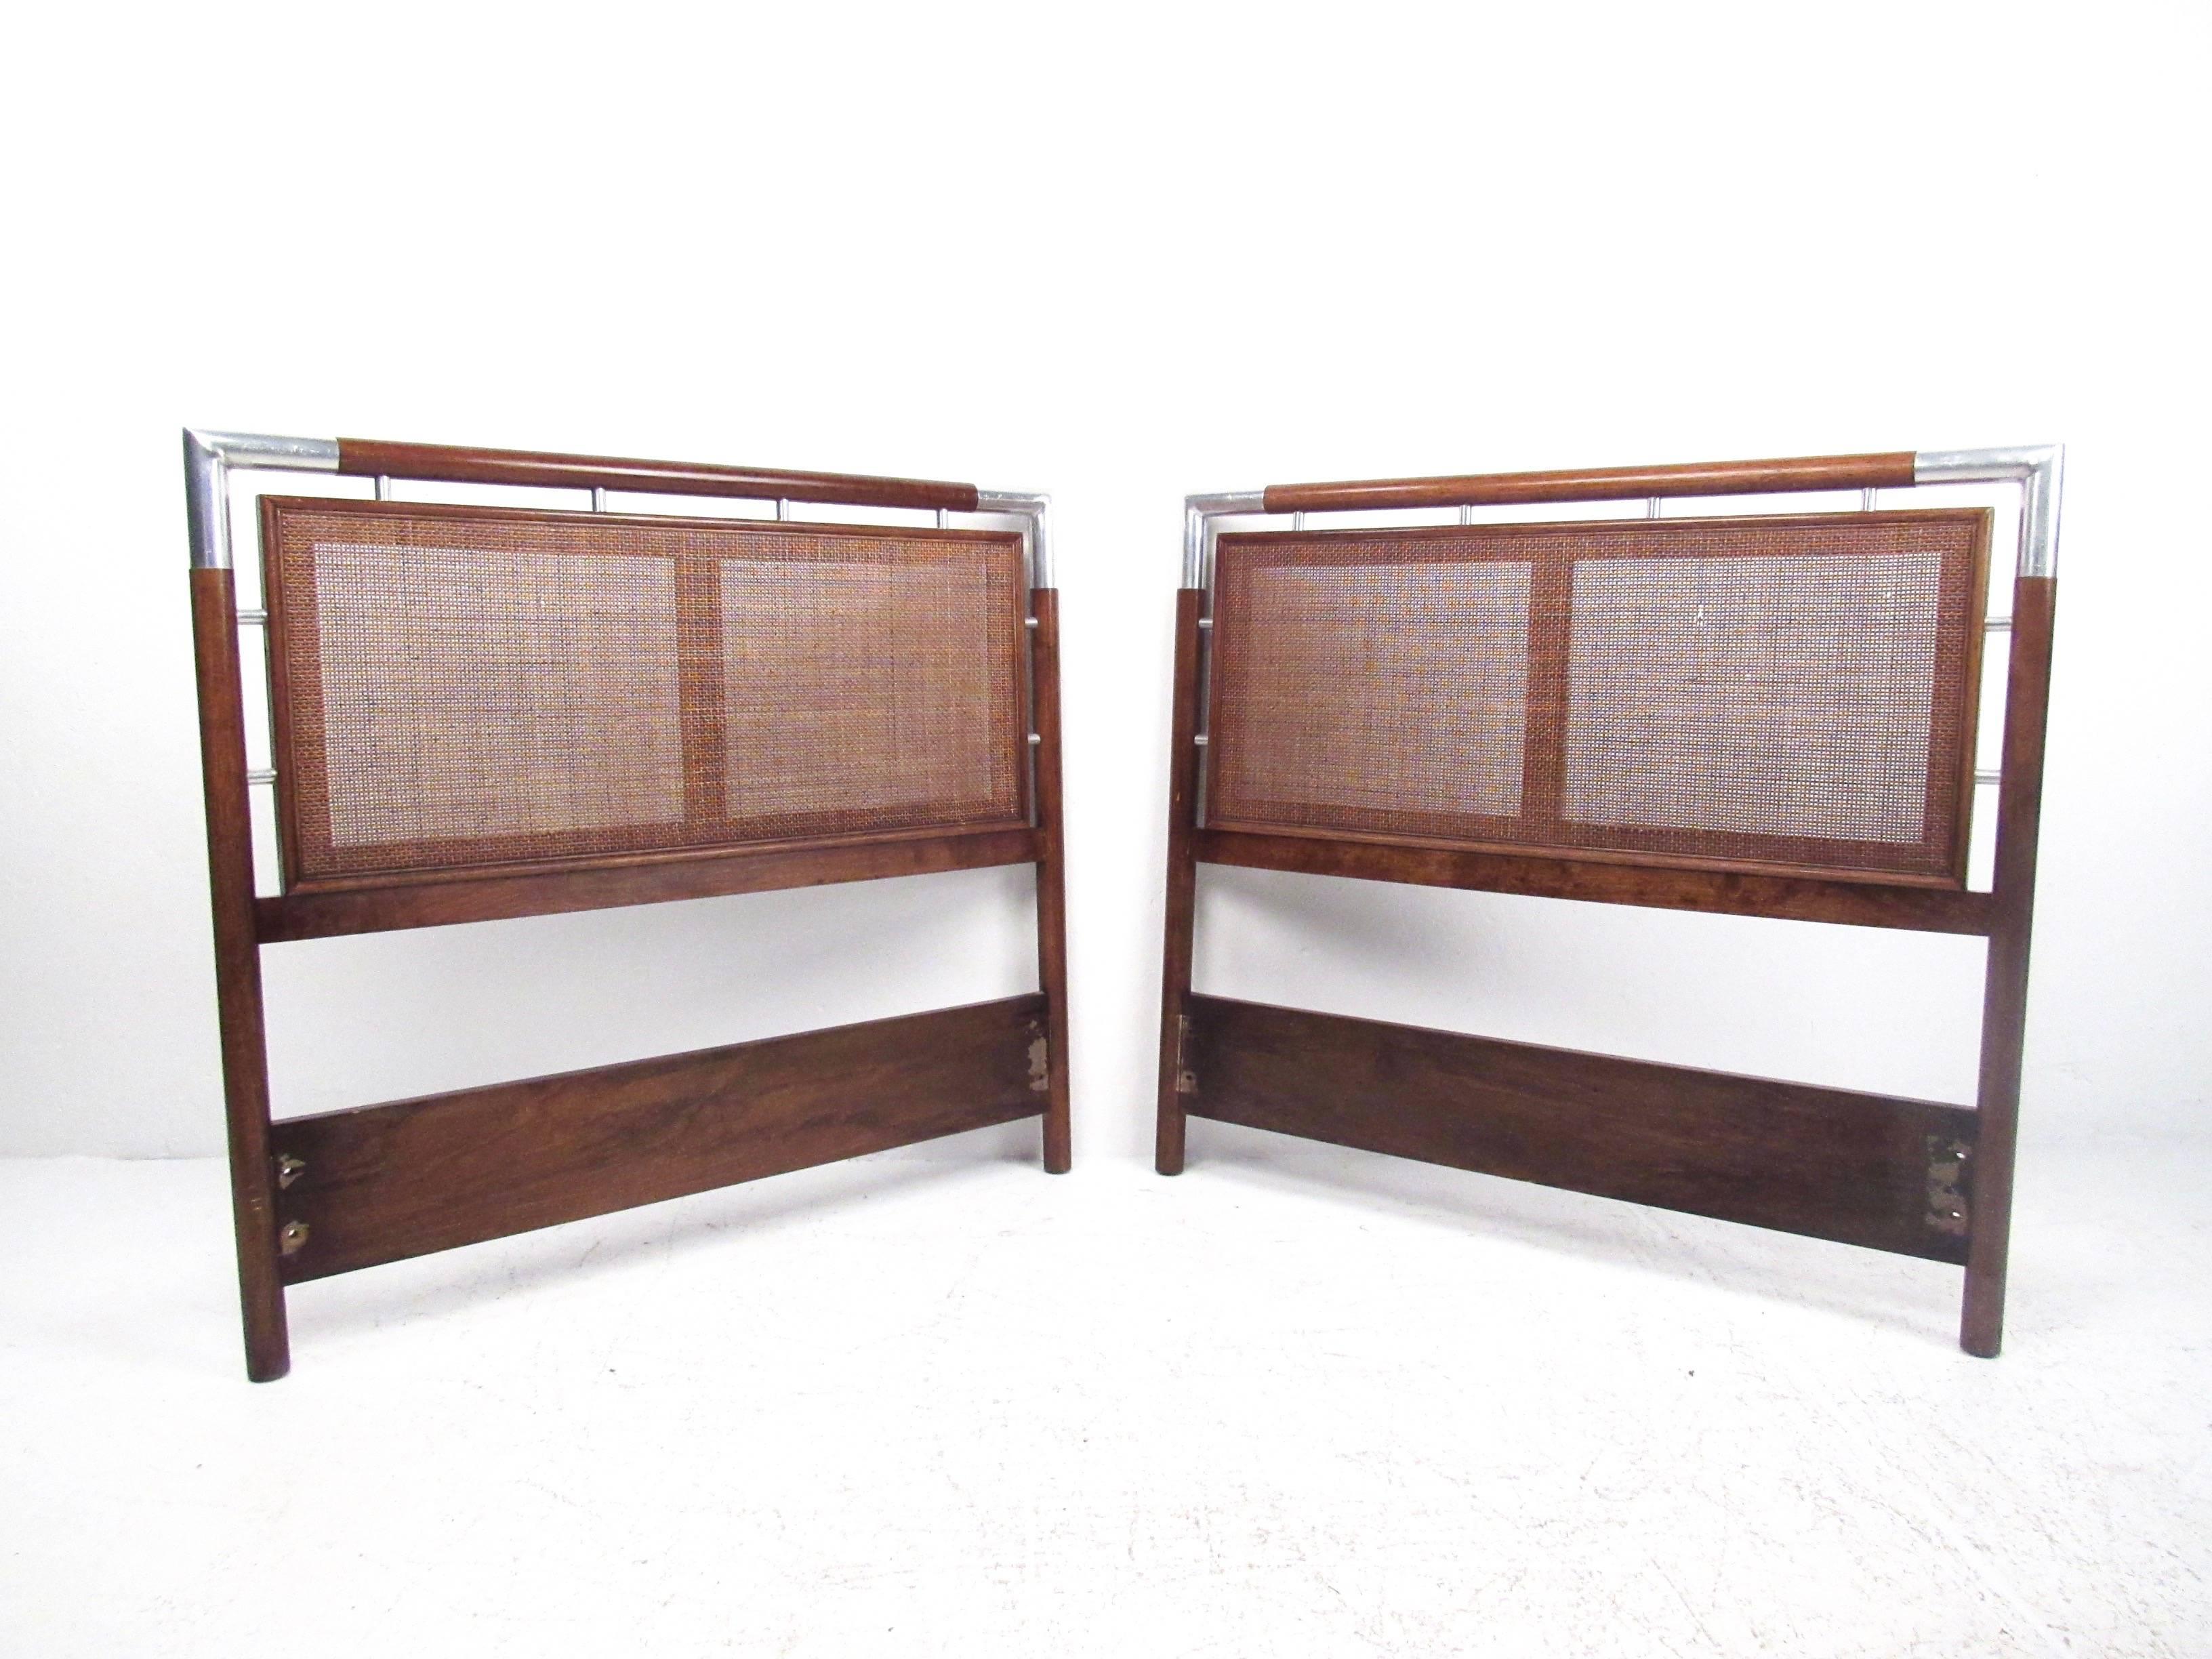 This vintage modern pair of headboards features a unique Mid-Century design with woven cane and chrome details. Can be used for a pair of children's beds or as a 